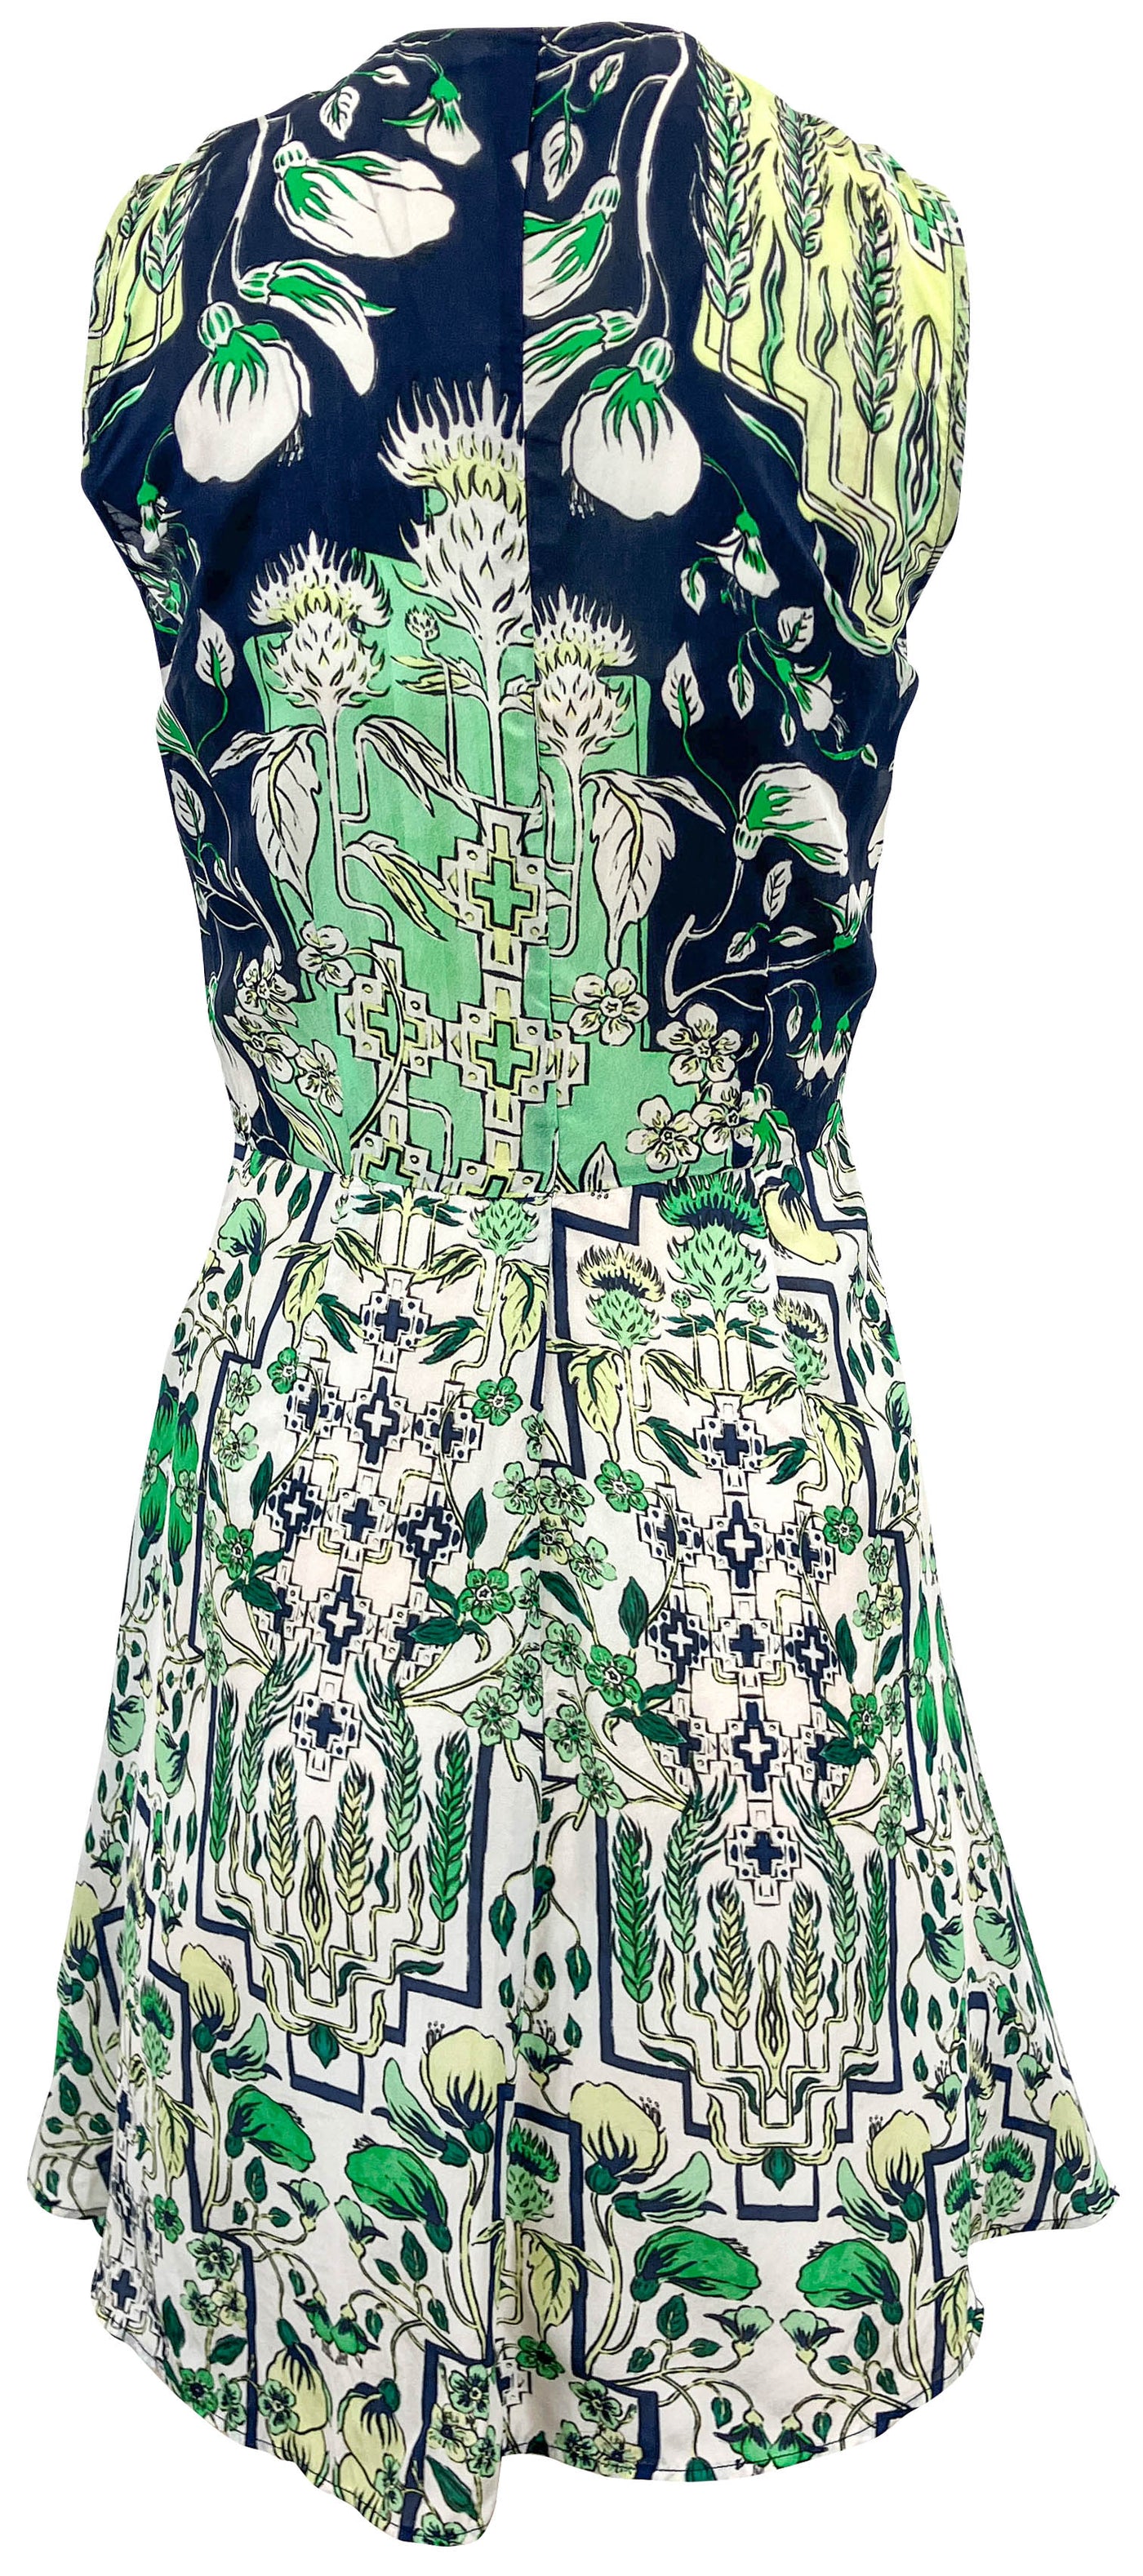 Maria Cher. Sleeveless Silk Mini Dress in Navy and Green - Discounts on Maria Cher. at UAL